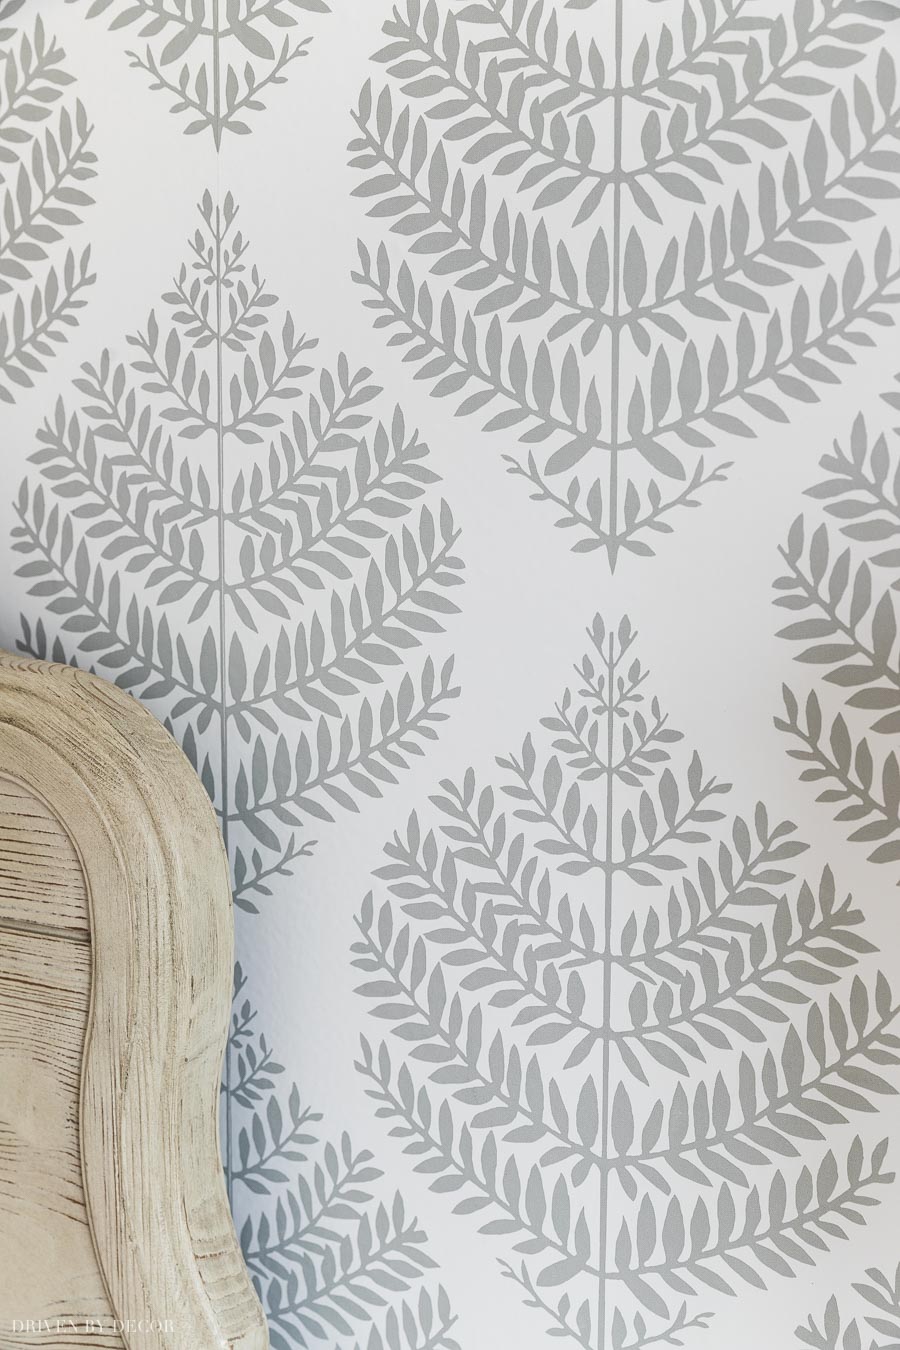 LOVE this peel and stick wallpaper - so cute!